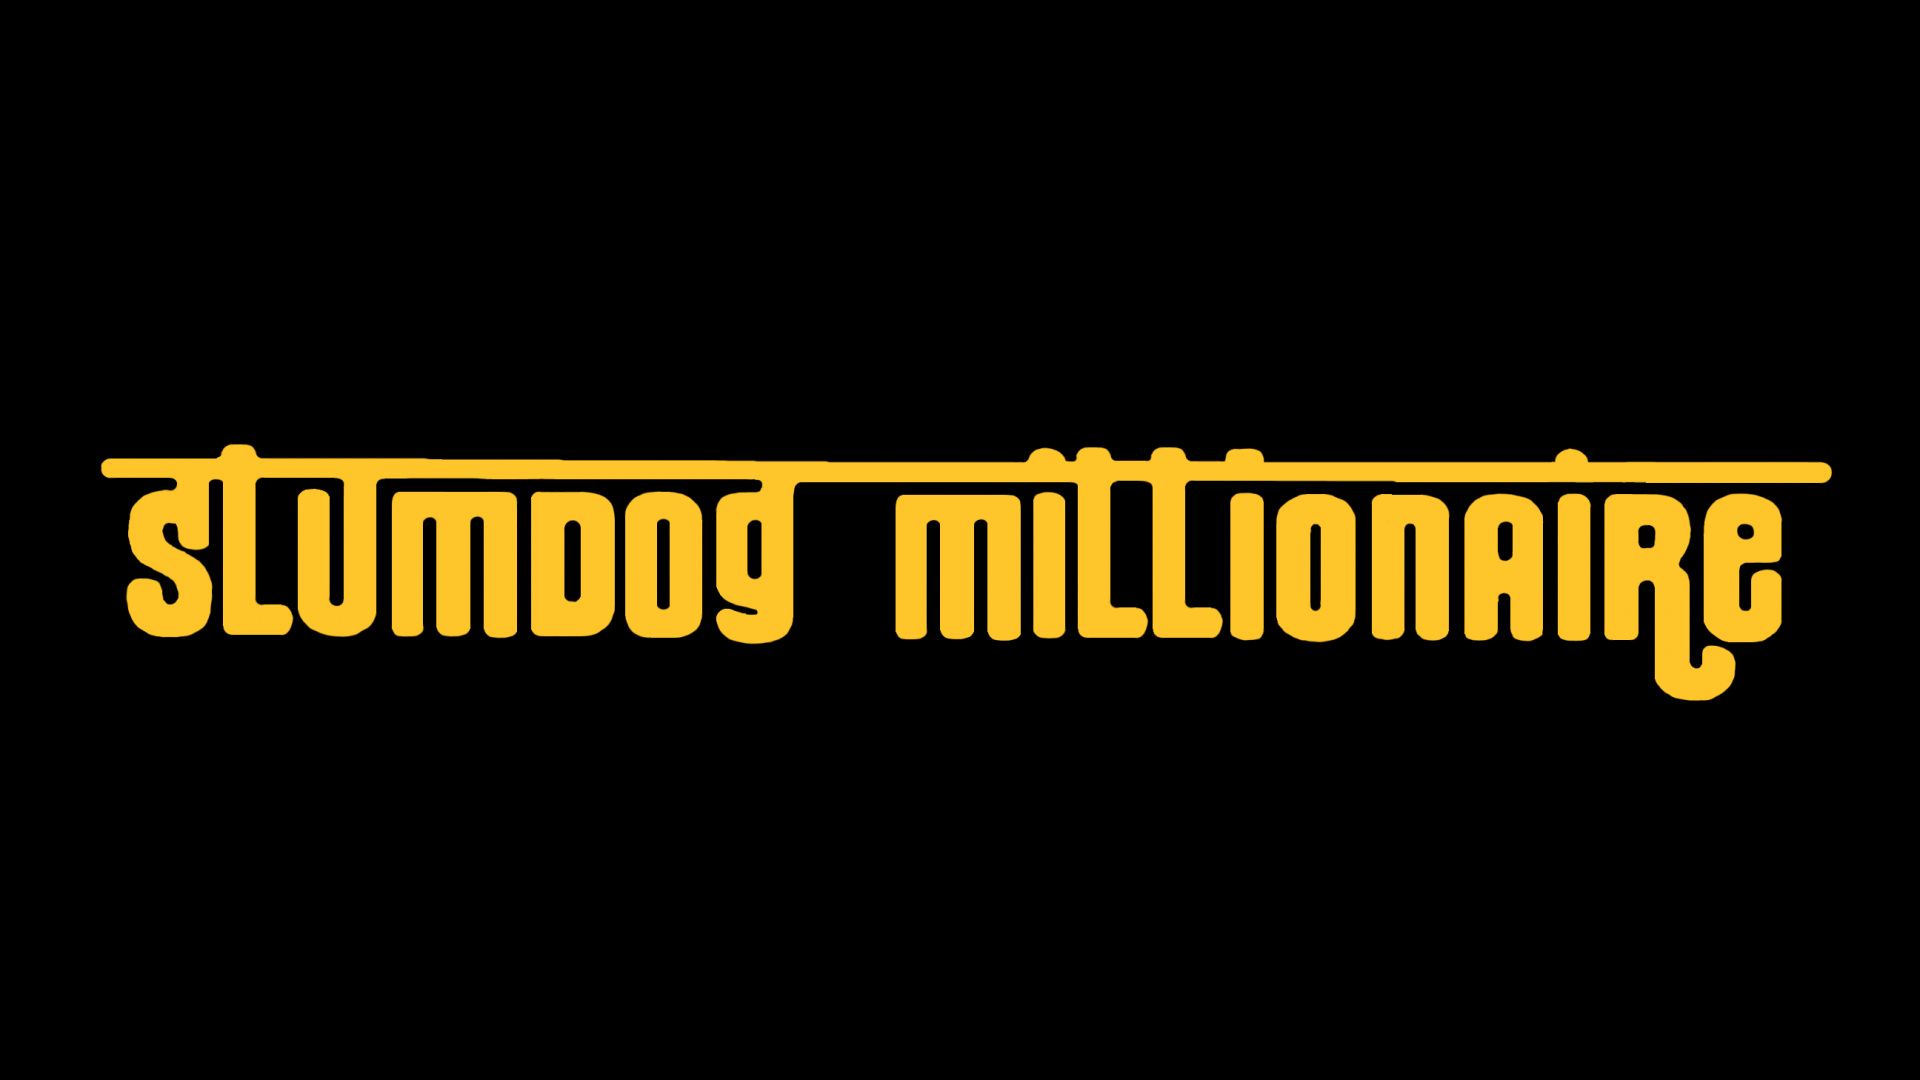 Slumdog Millionaire: The film had a nationwide release in the United Kingdom on 9 January 2009. 1920x1080 Full HD Background.